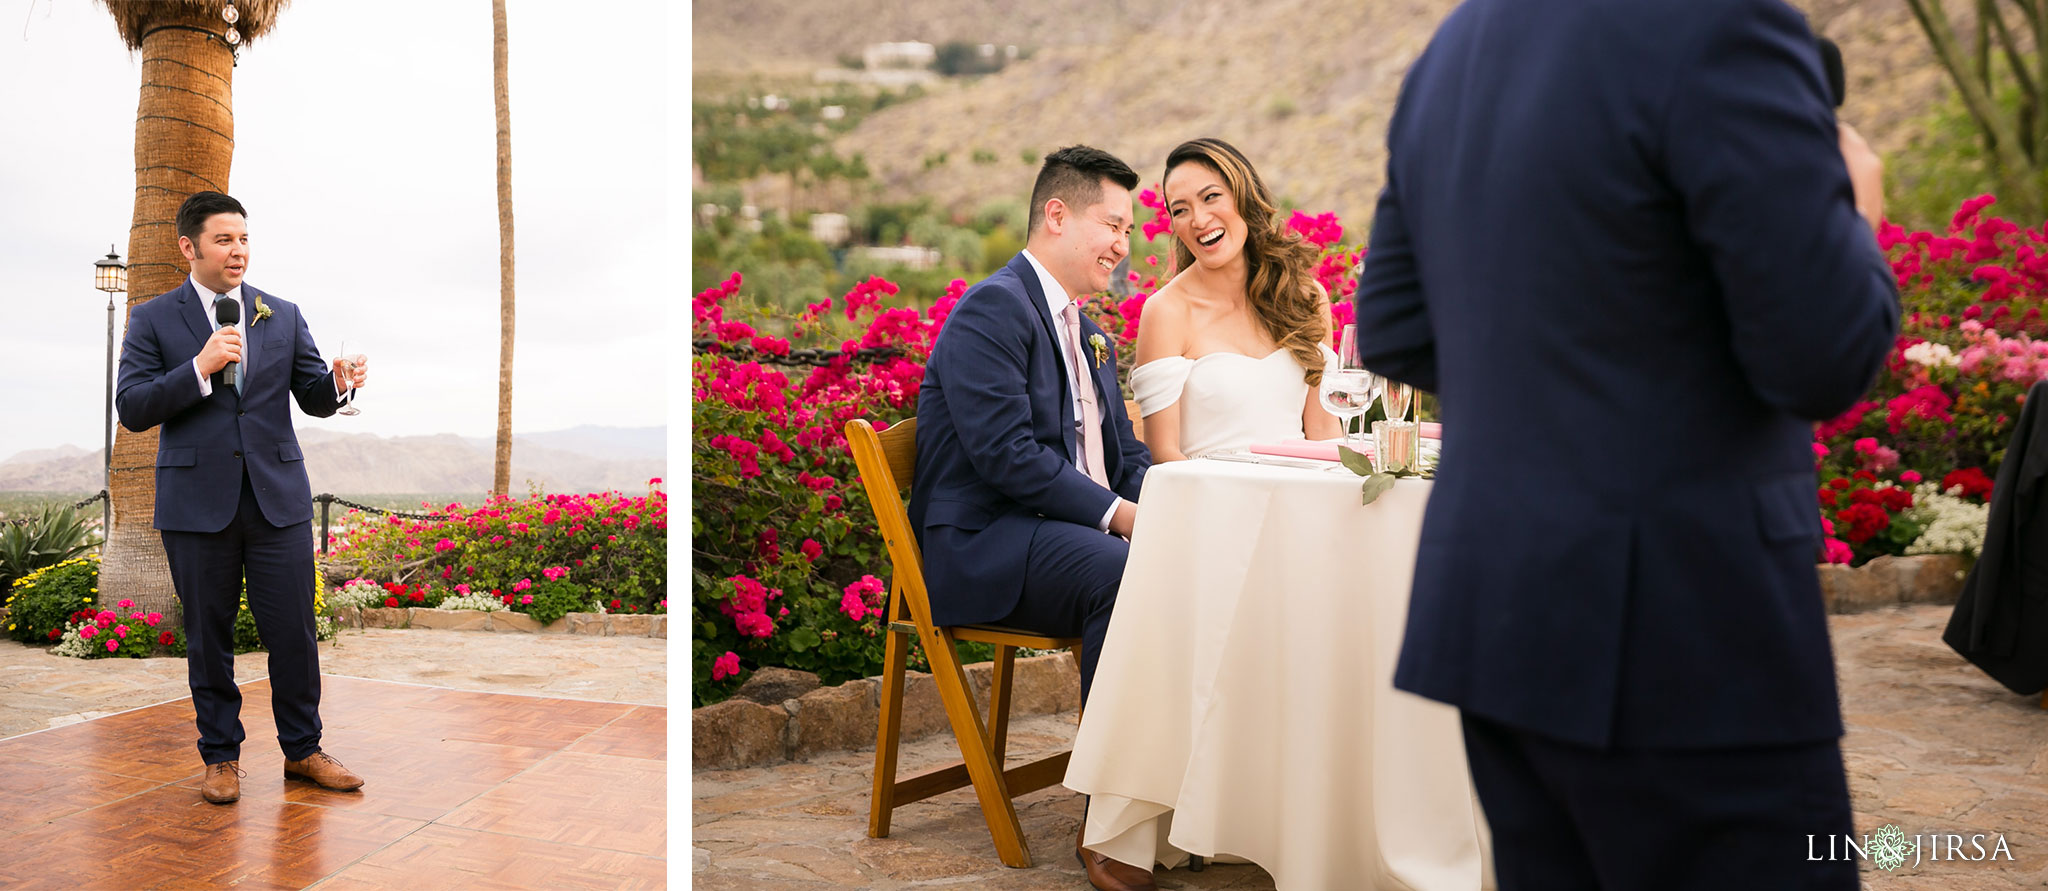 31 odonnell house palm springs wedding reception photography